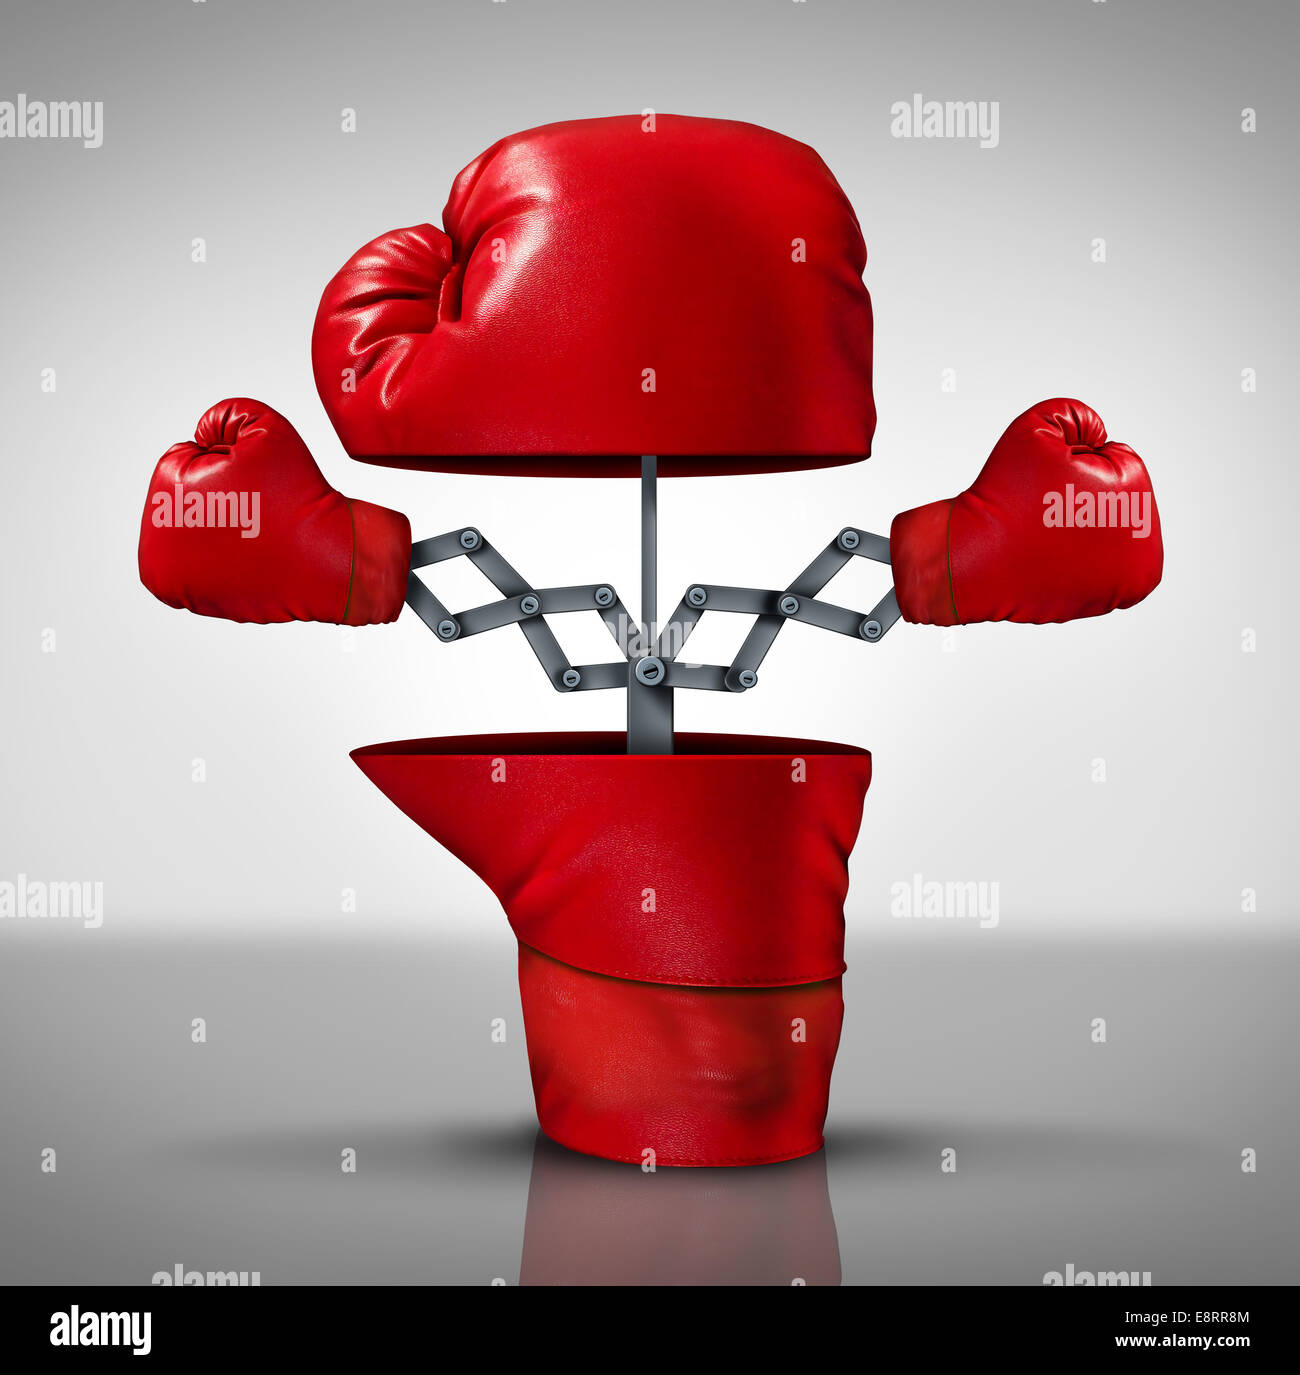 Business advantage and innovation strategy concept as an open boxing glove with two more fighting symbols emerging as an icon of covering your bases and extending youre reach to compete successfully. Stock Photo